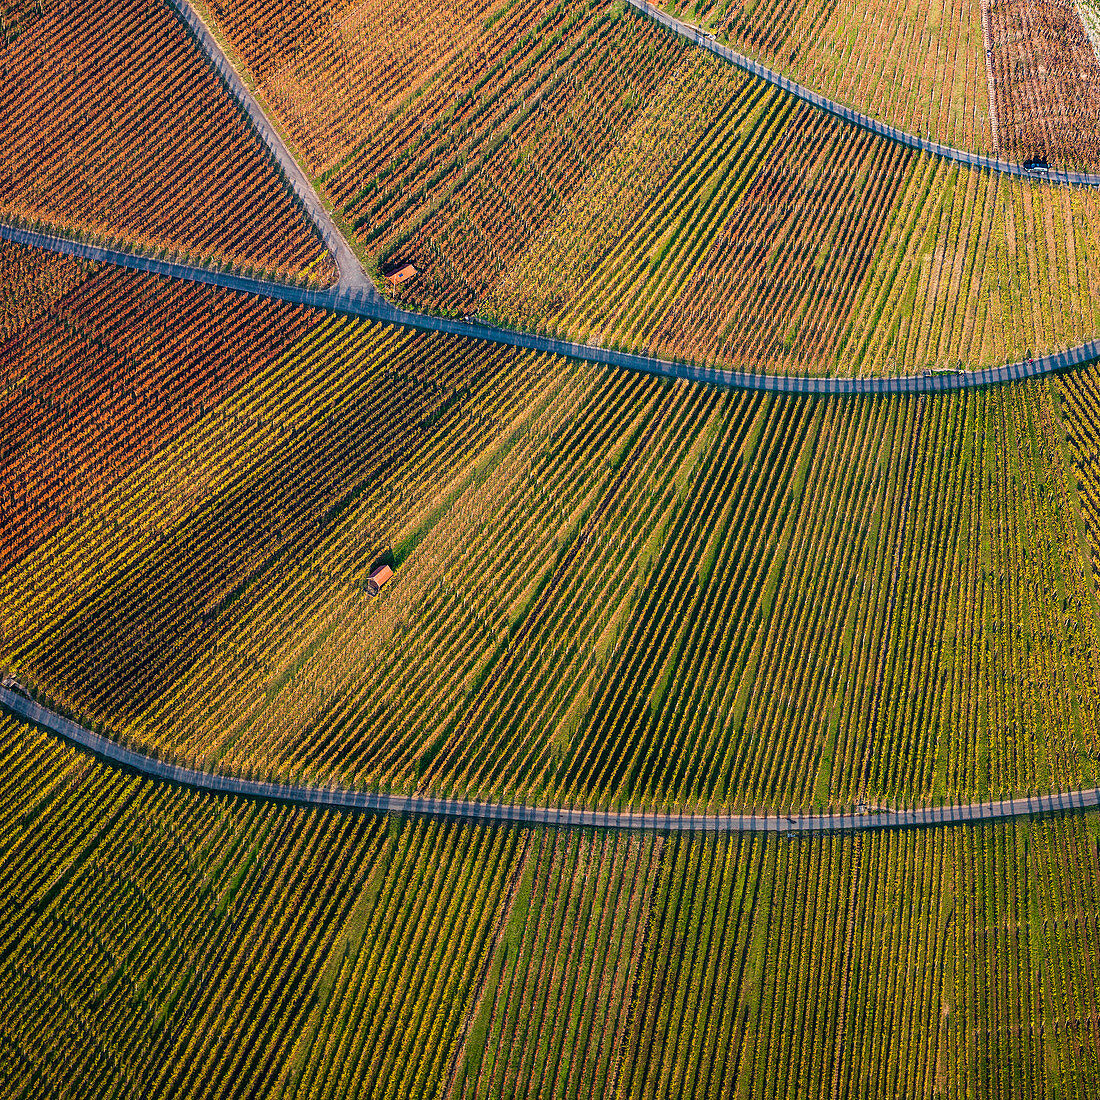 View from above textured green farmland crops